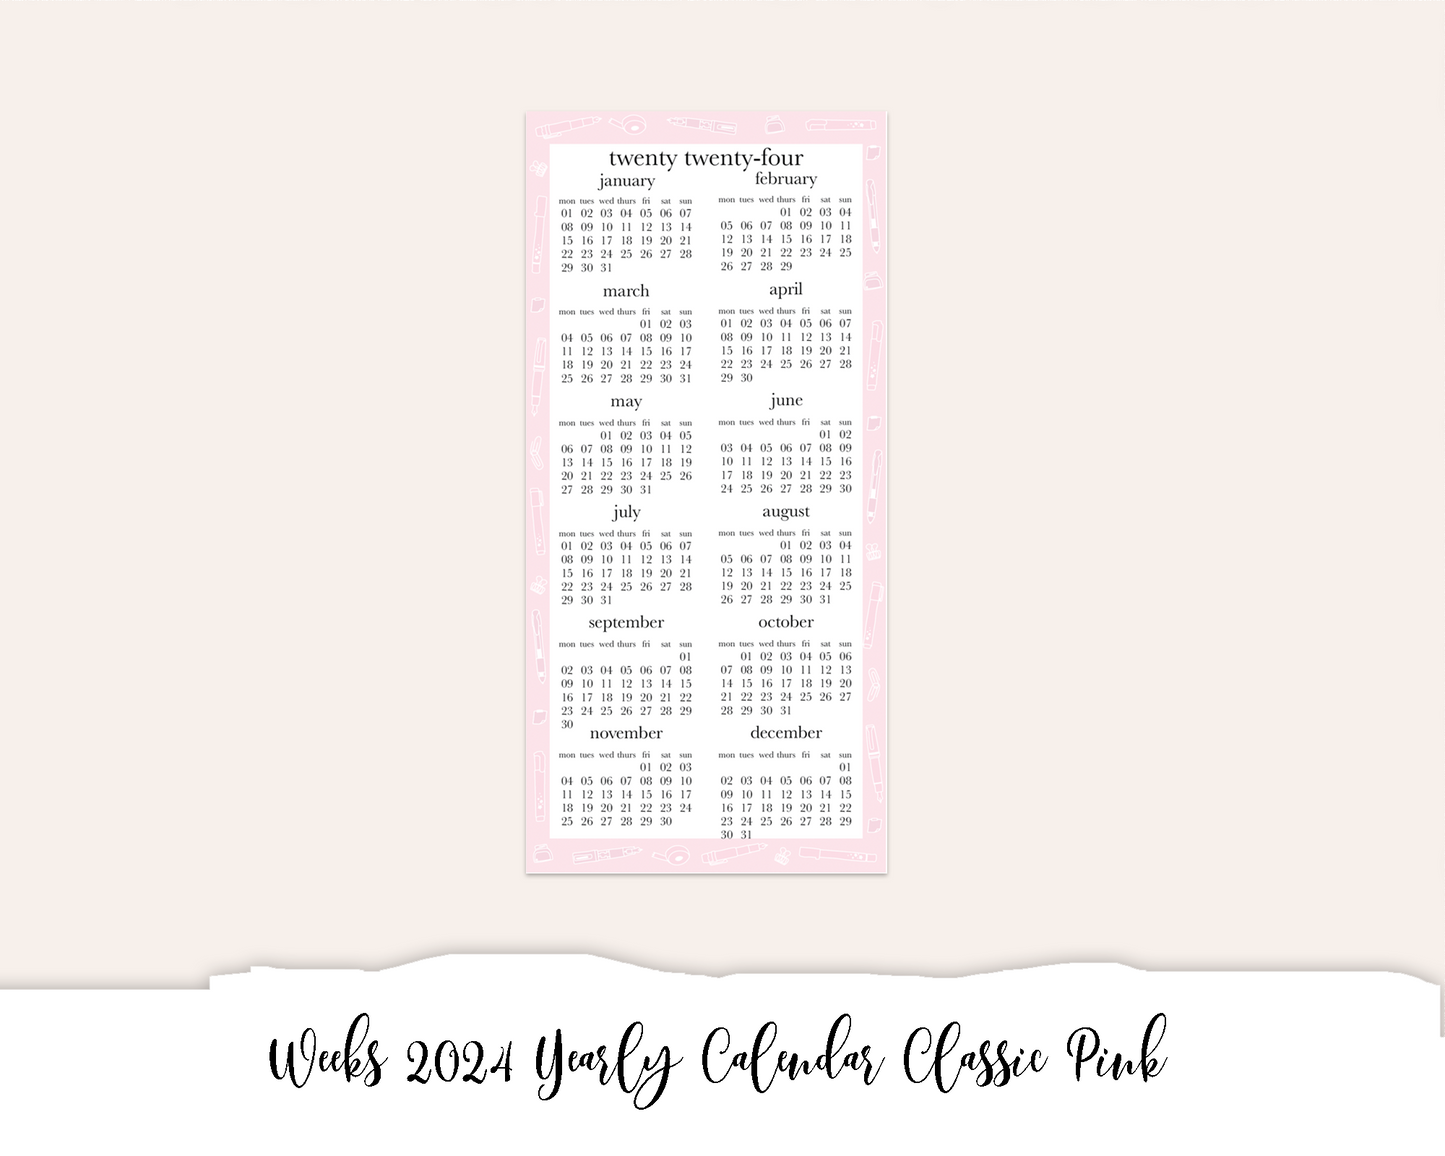 Weeks 2024 Yearly Calendar Classic Pink (Full Page Printable Stickers)